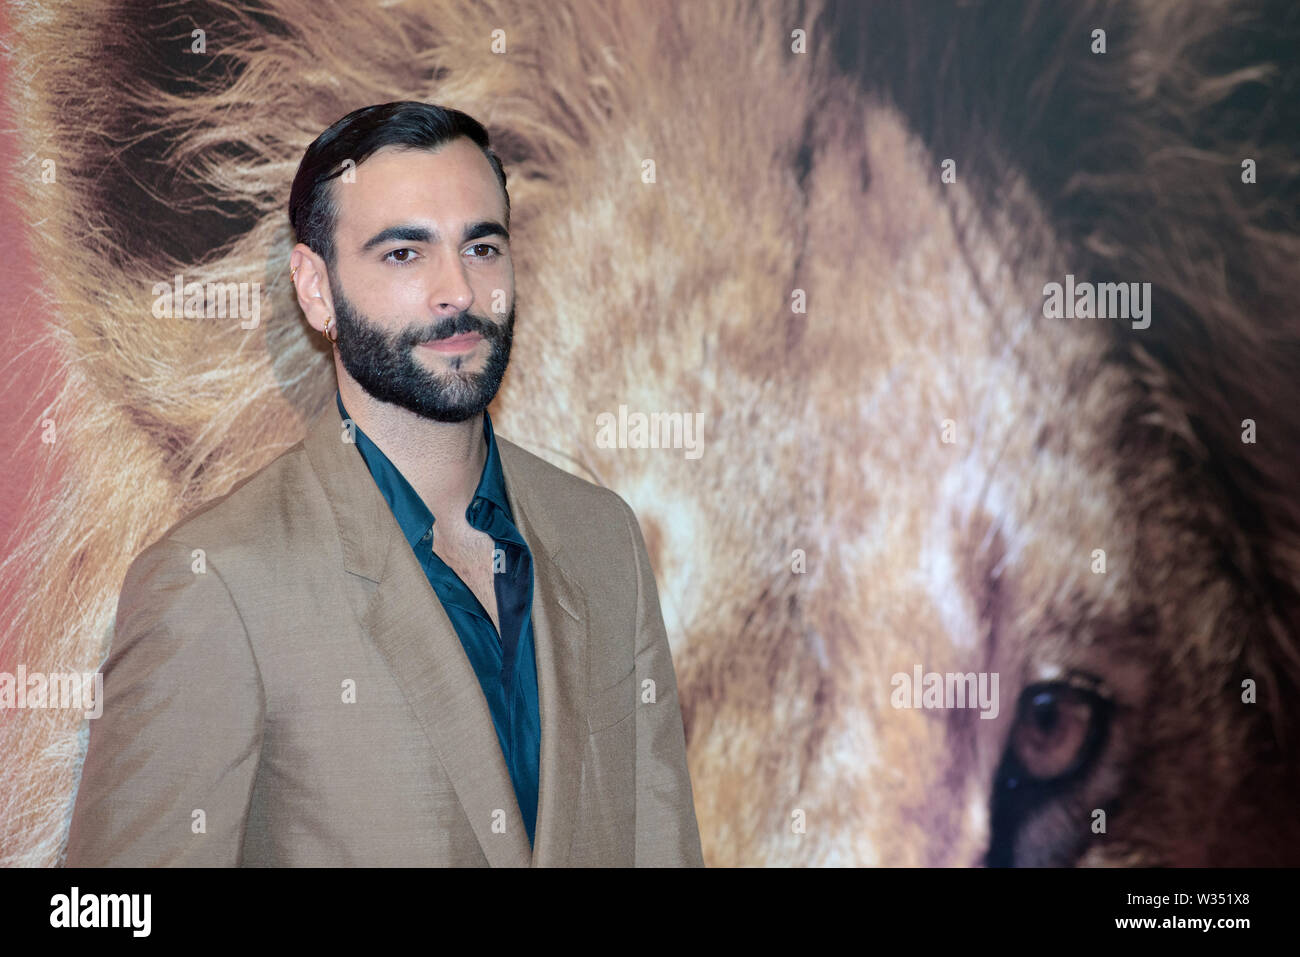 Italian singers Marco Mengoni and Elisa attending the photocall of The Lion King in Rome Stock Photo